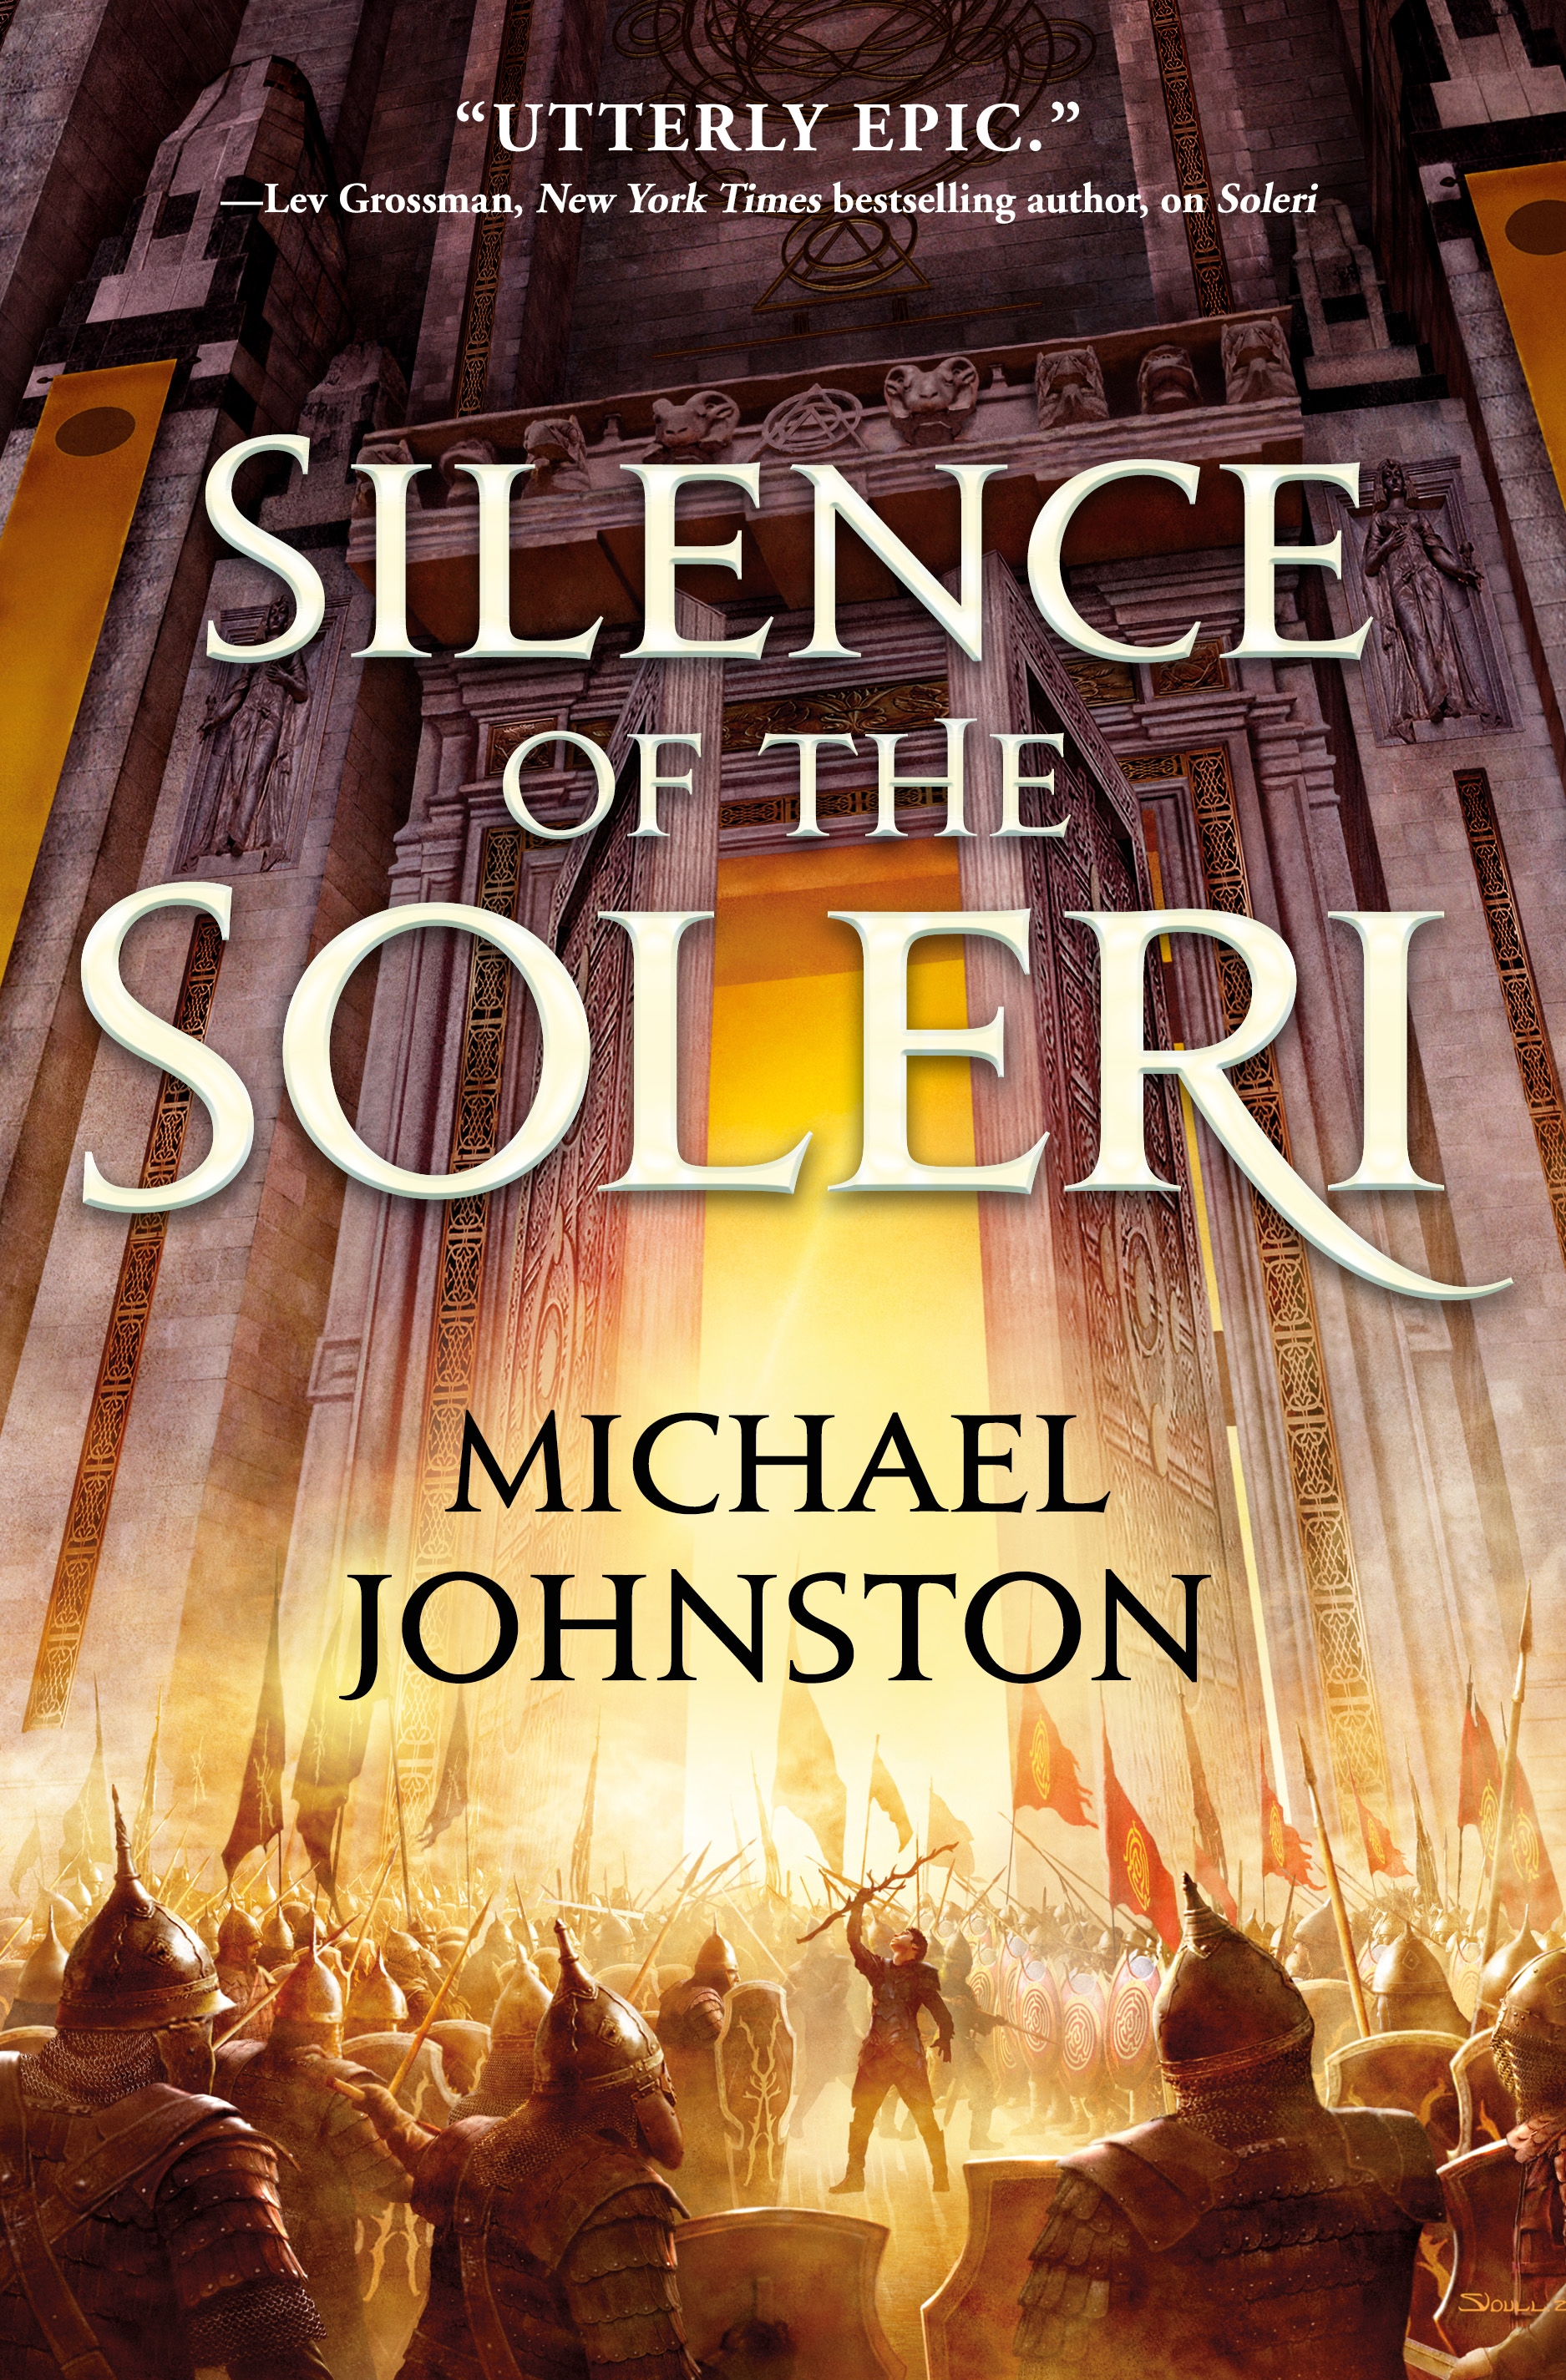 Silence of the Soleri by Michael Johnston